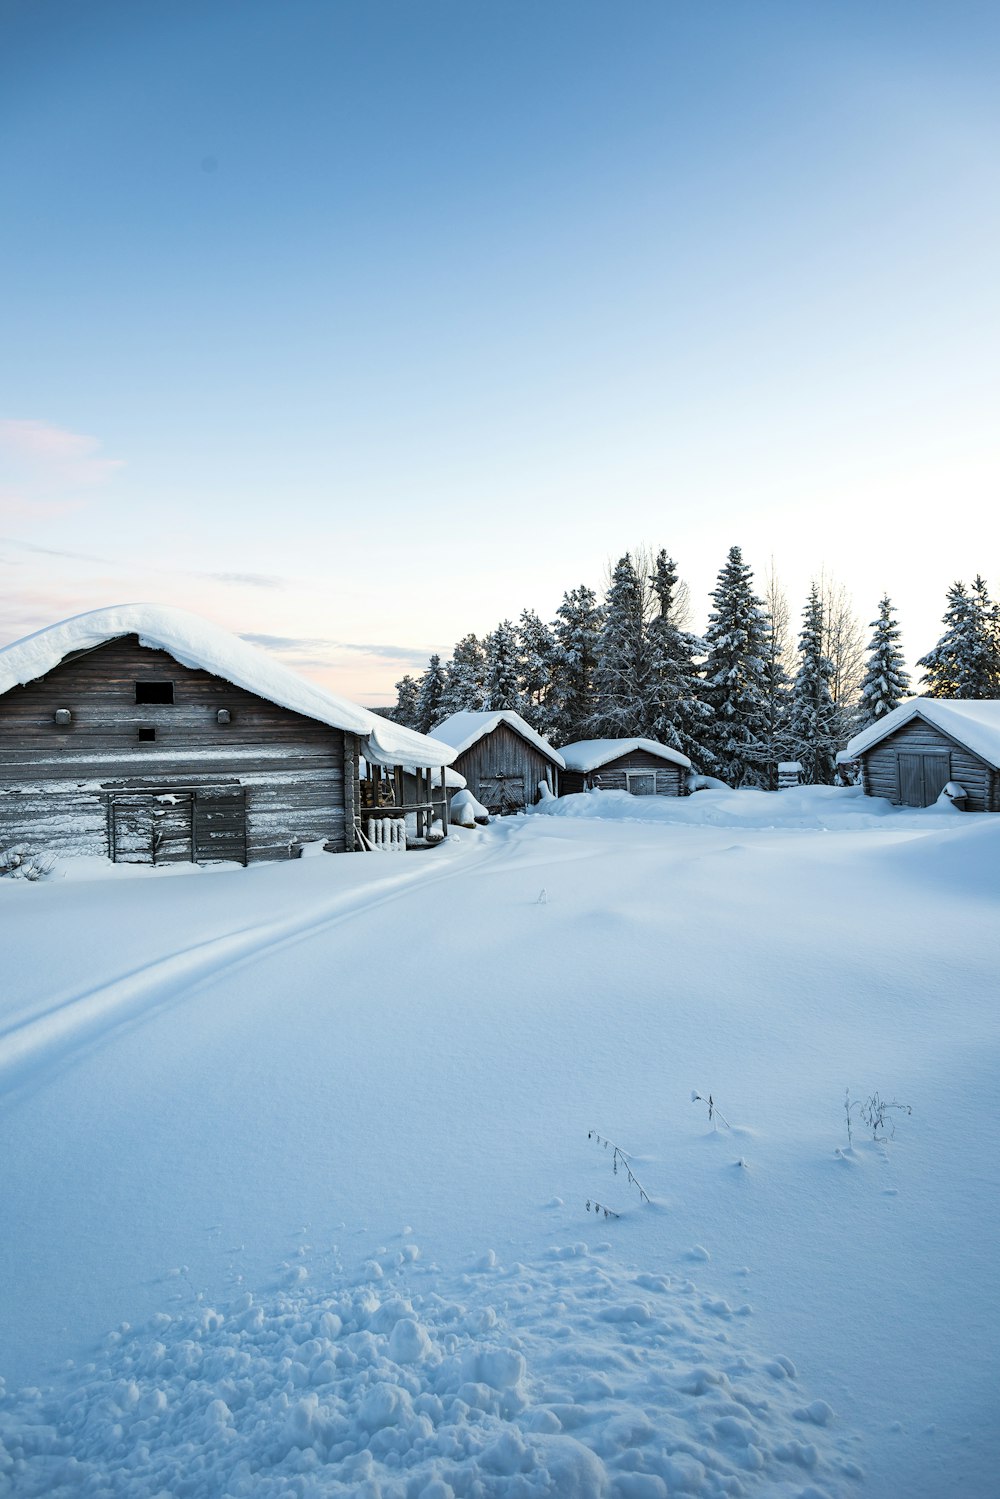 snow covered houses and land near trees during day